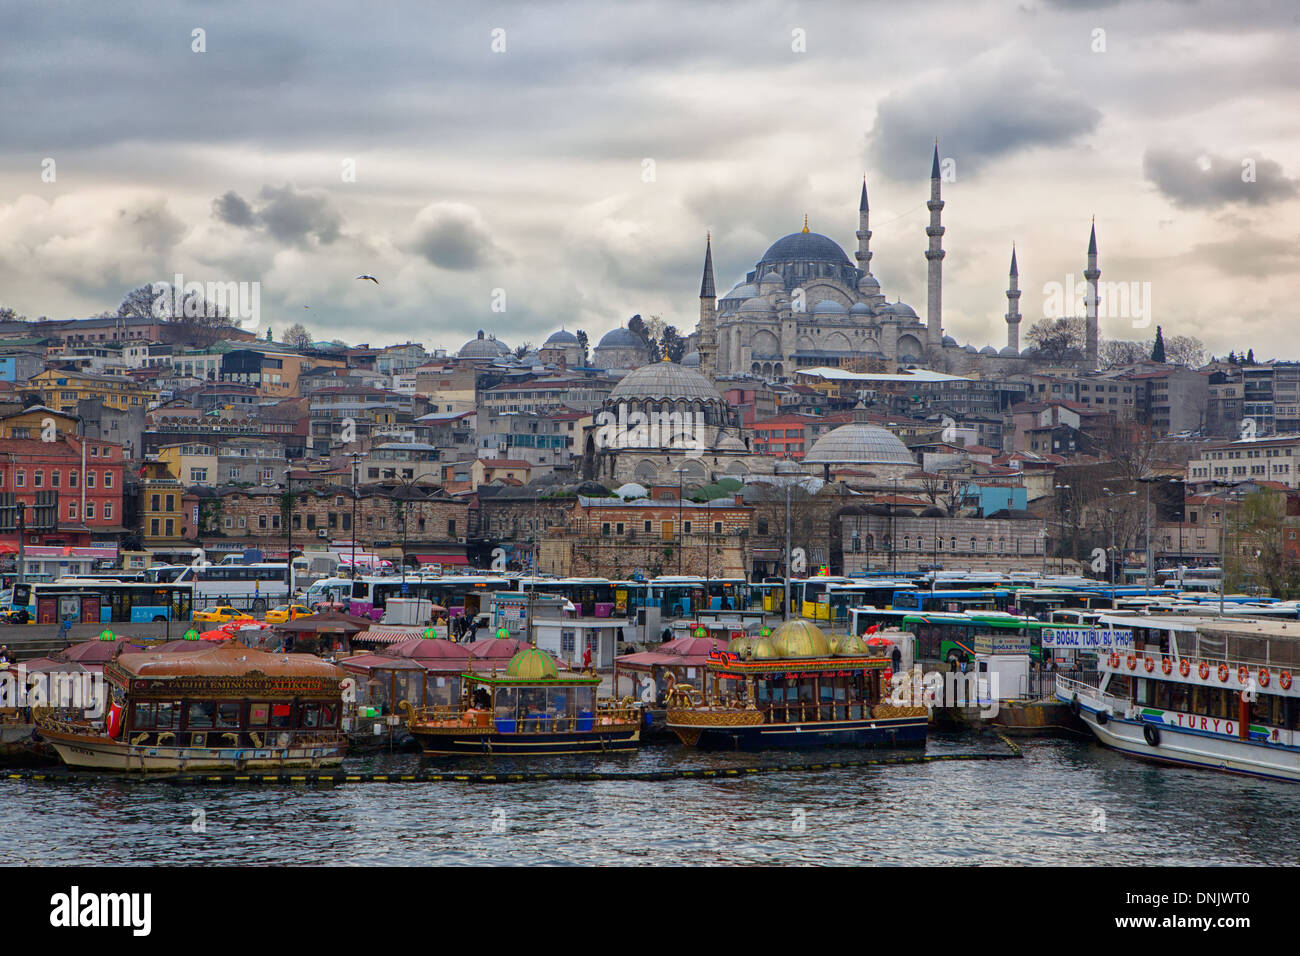 A view of The Süleymaniye Mosque as seen from the Galata Bridge in Istanbul, Turkey. Stock Photo